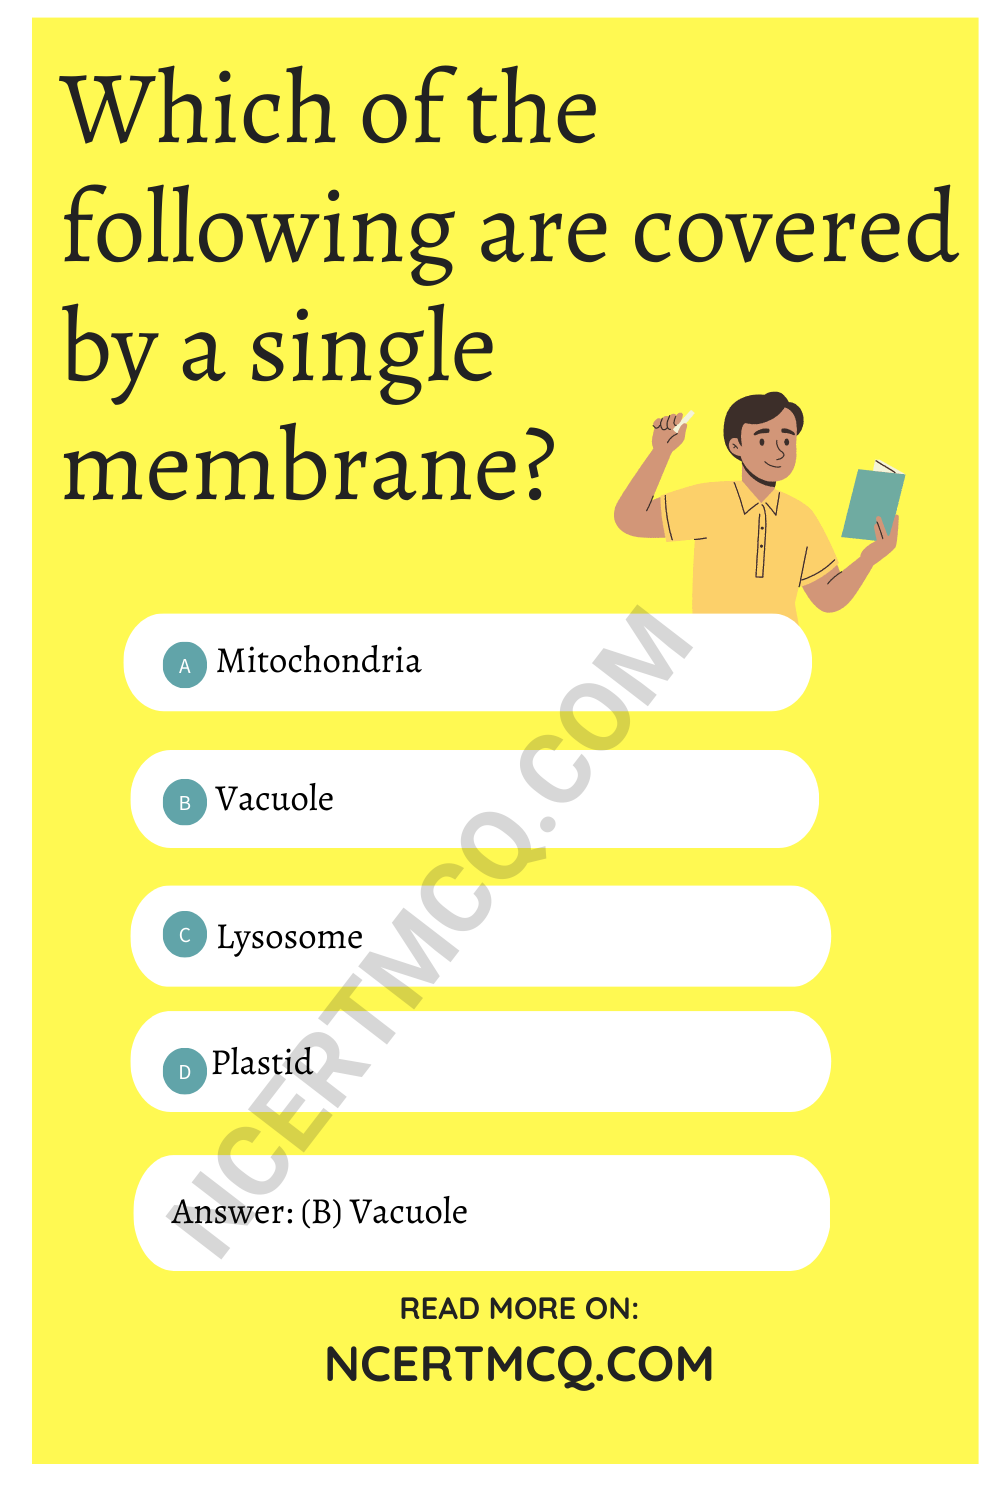 Which of the following are covered by a single membrane?